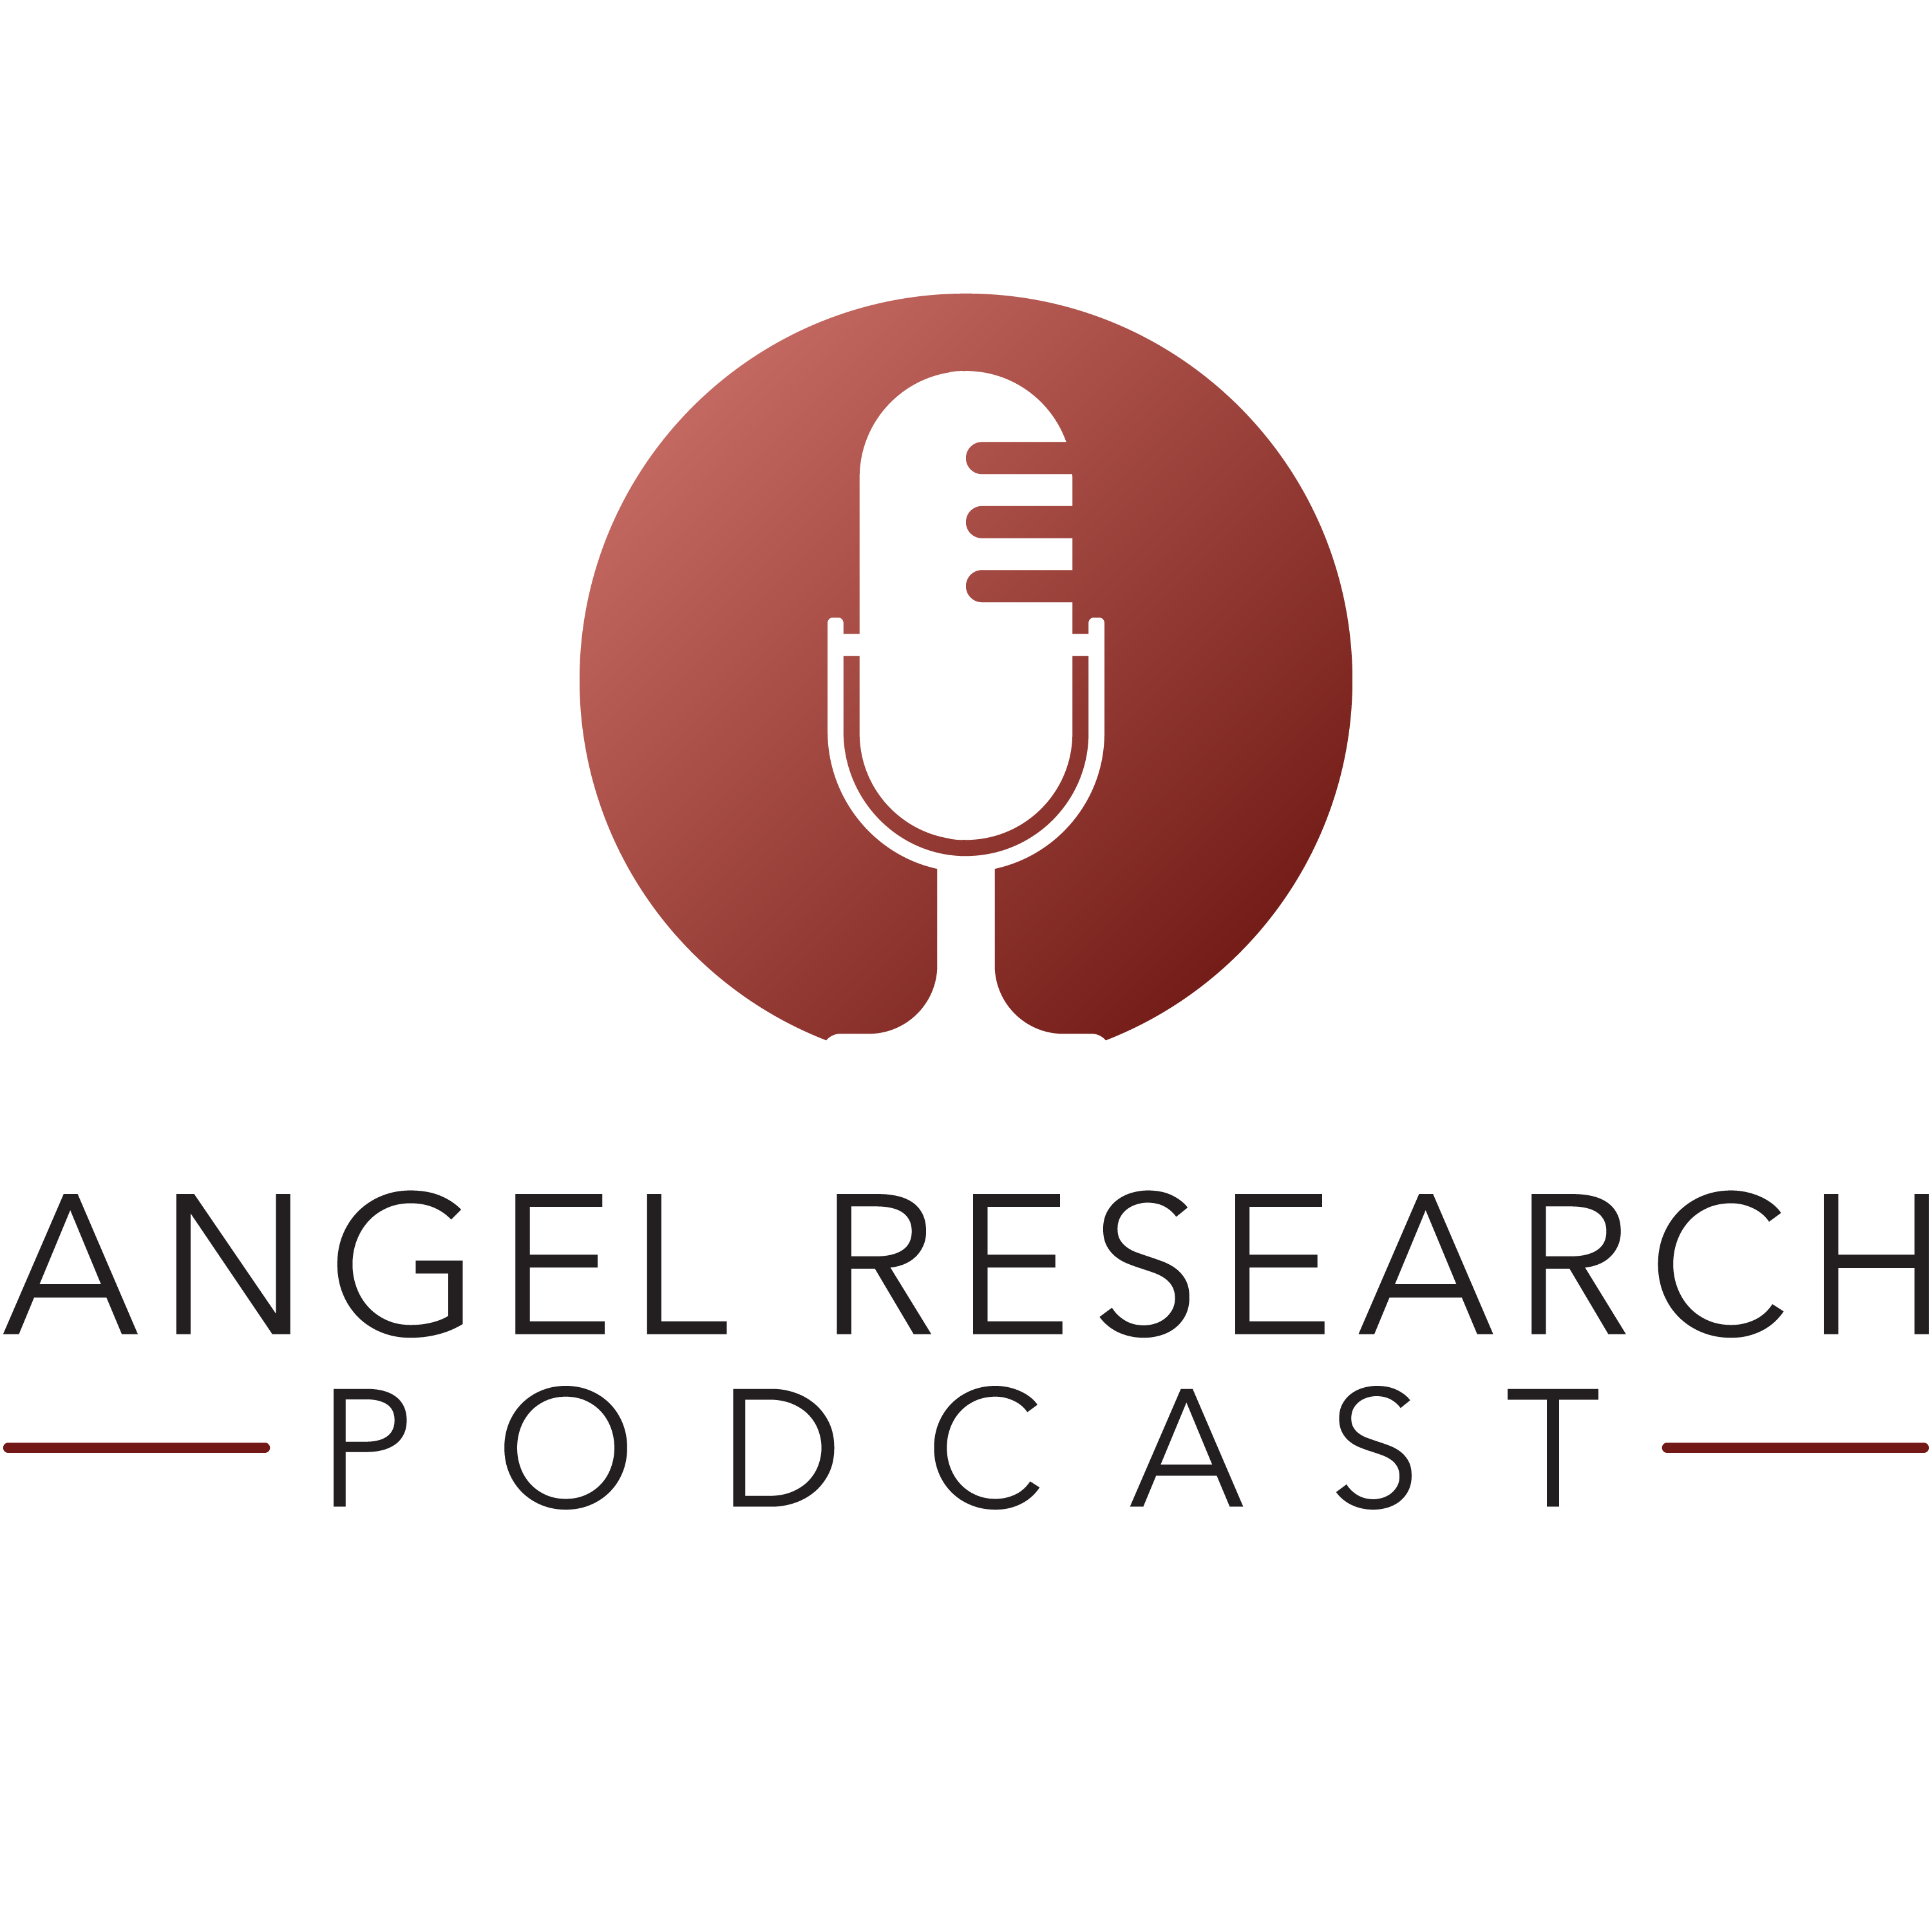 Show artwork for Angel Research Podcast